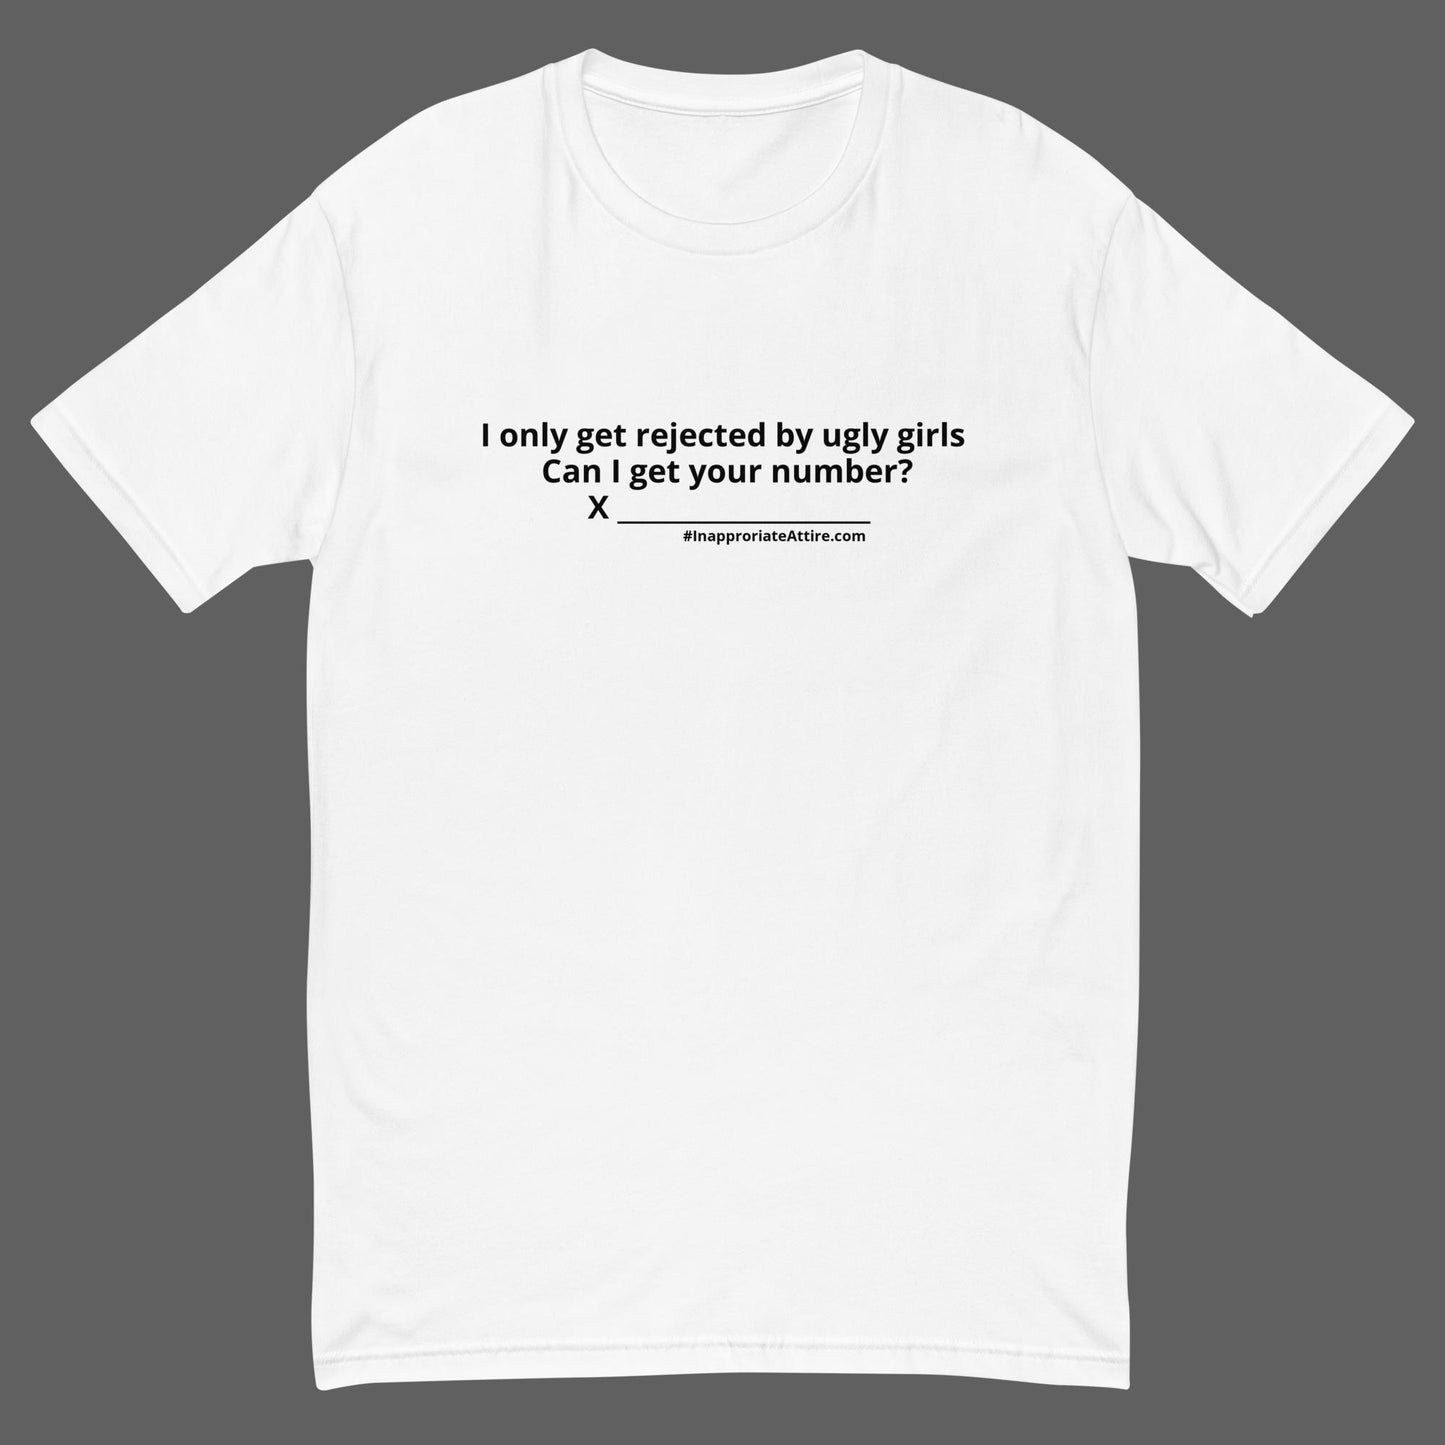 Rejected T-shirt